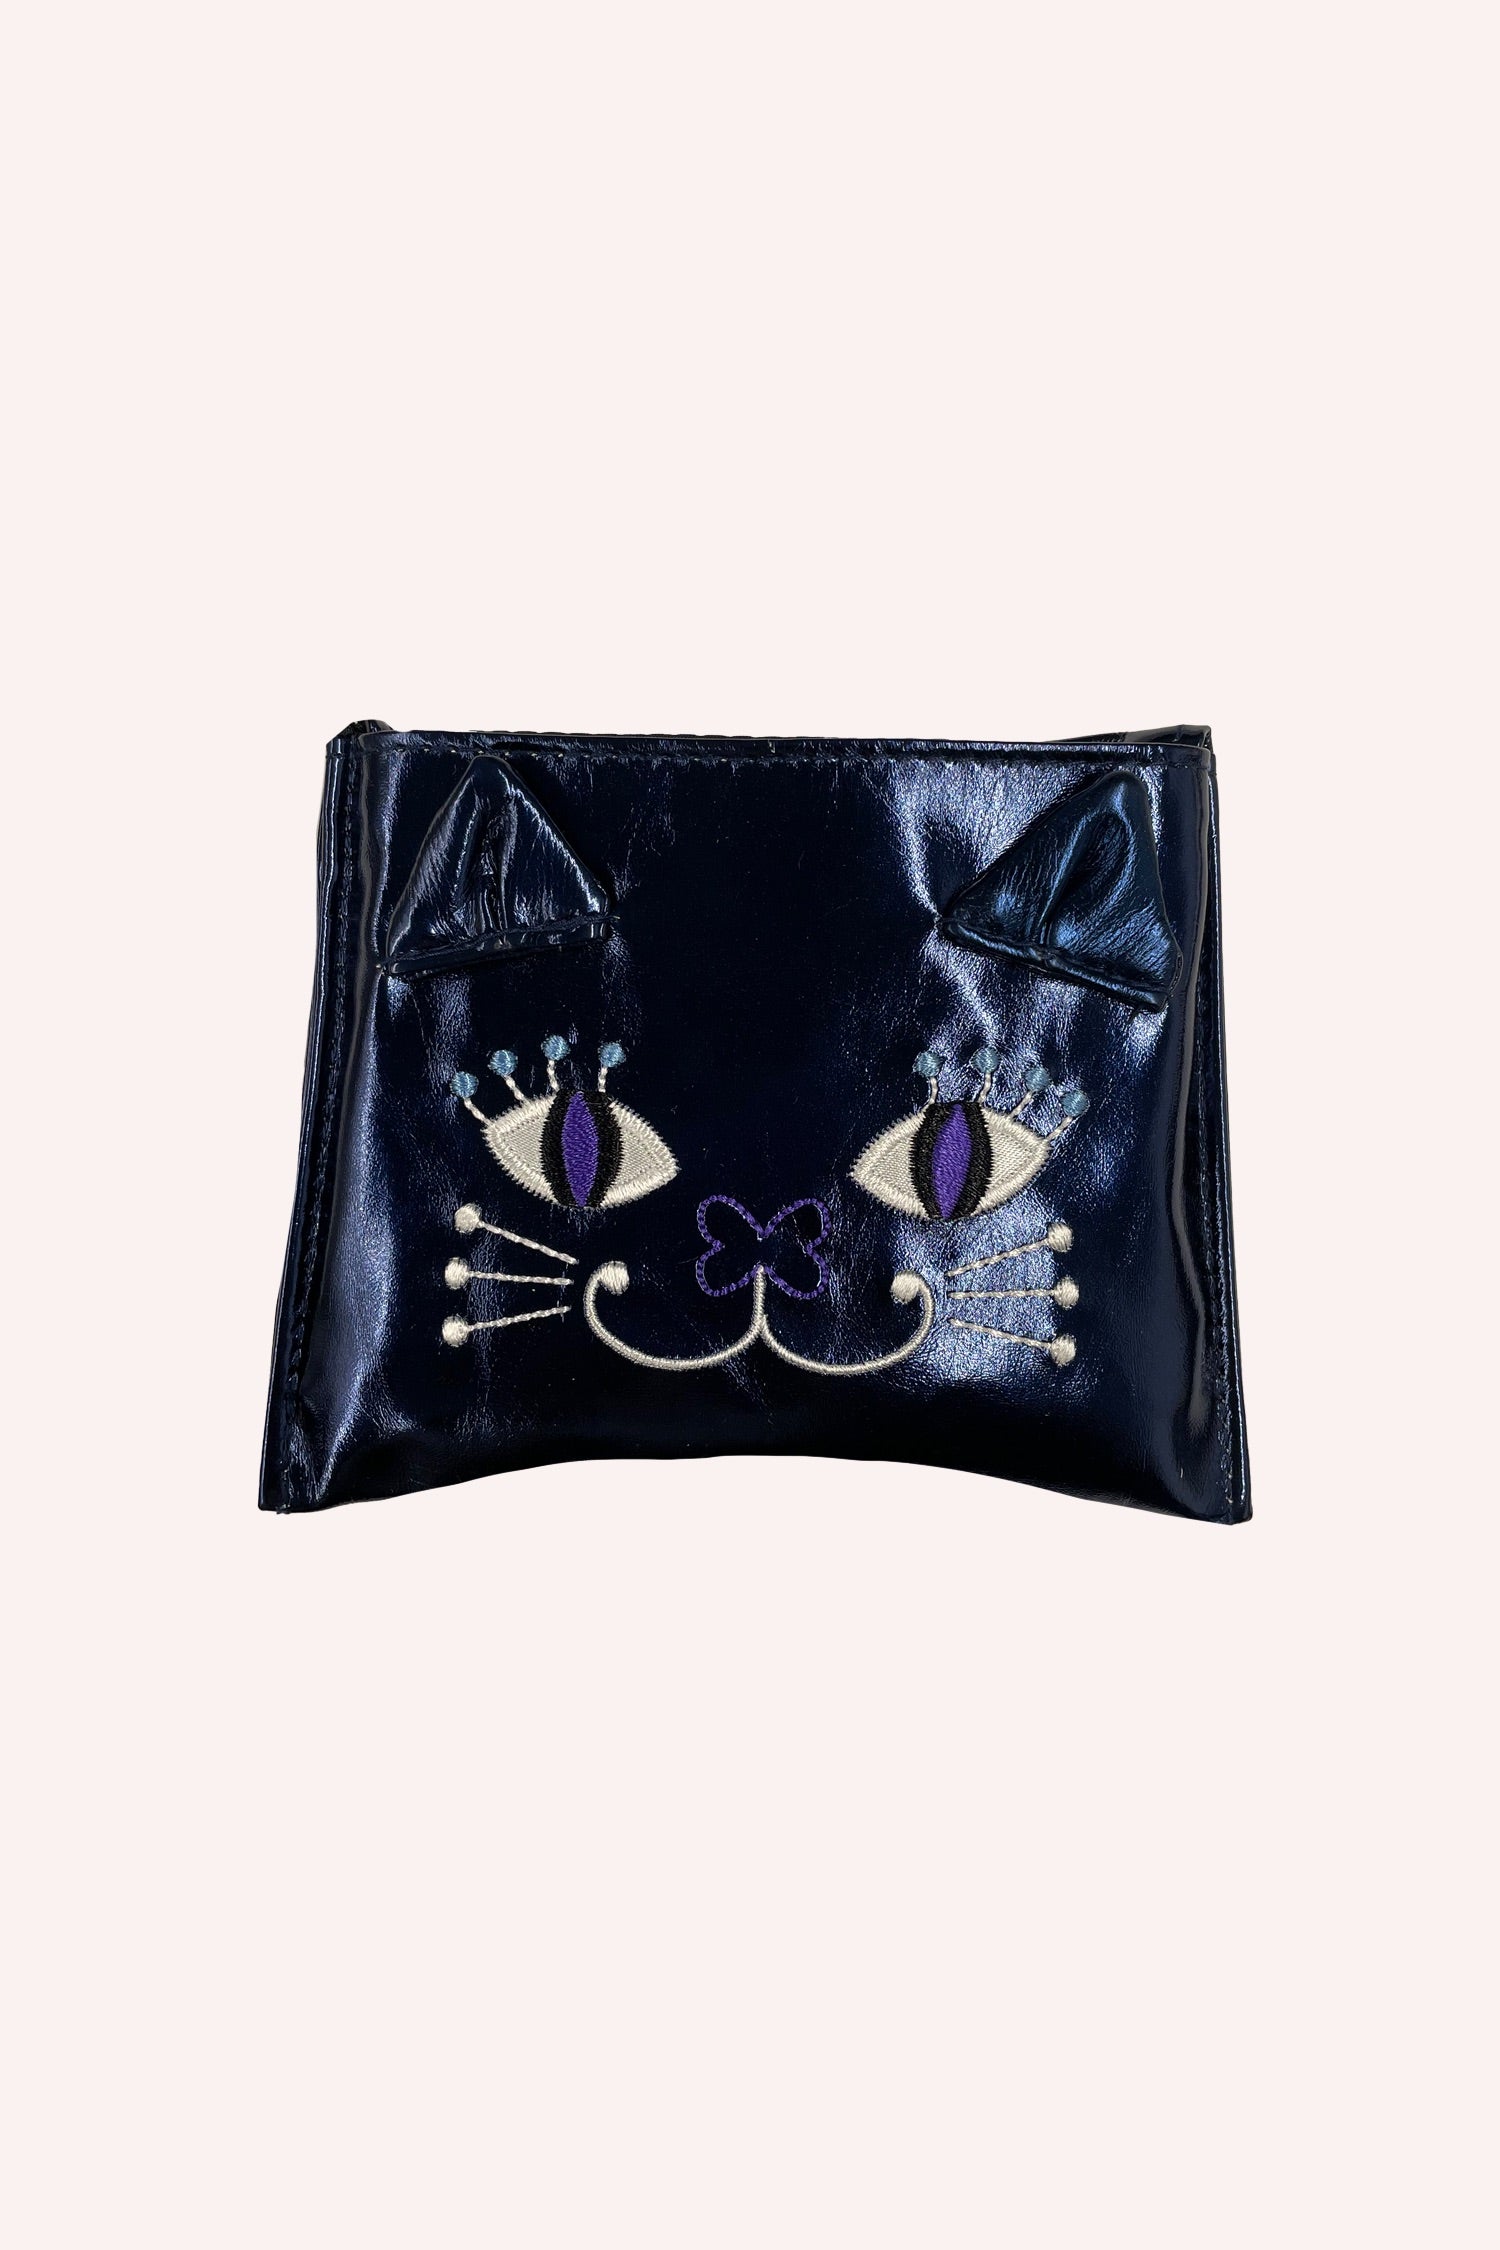 Tote Bag, dark blue Synthetic leather, stylized cat on front, black hems at borders, handles hidden